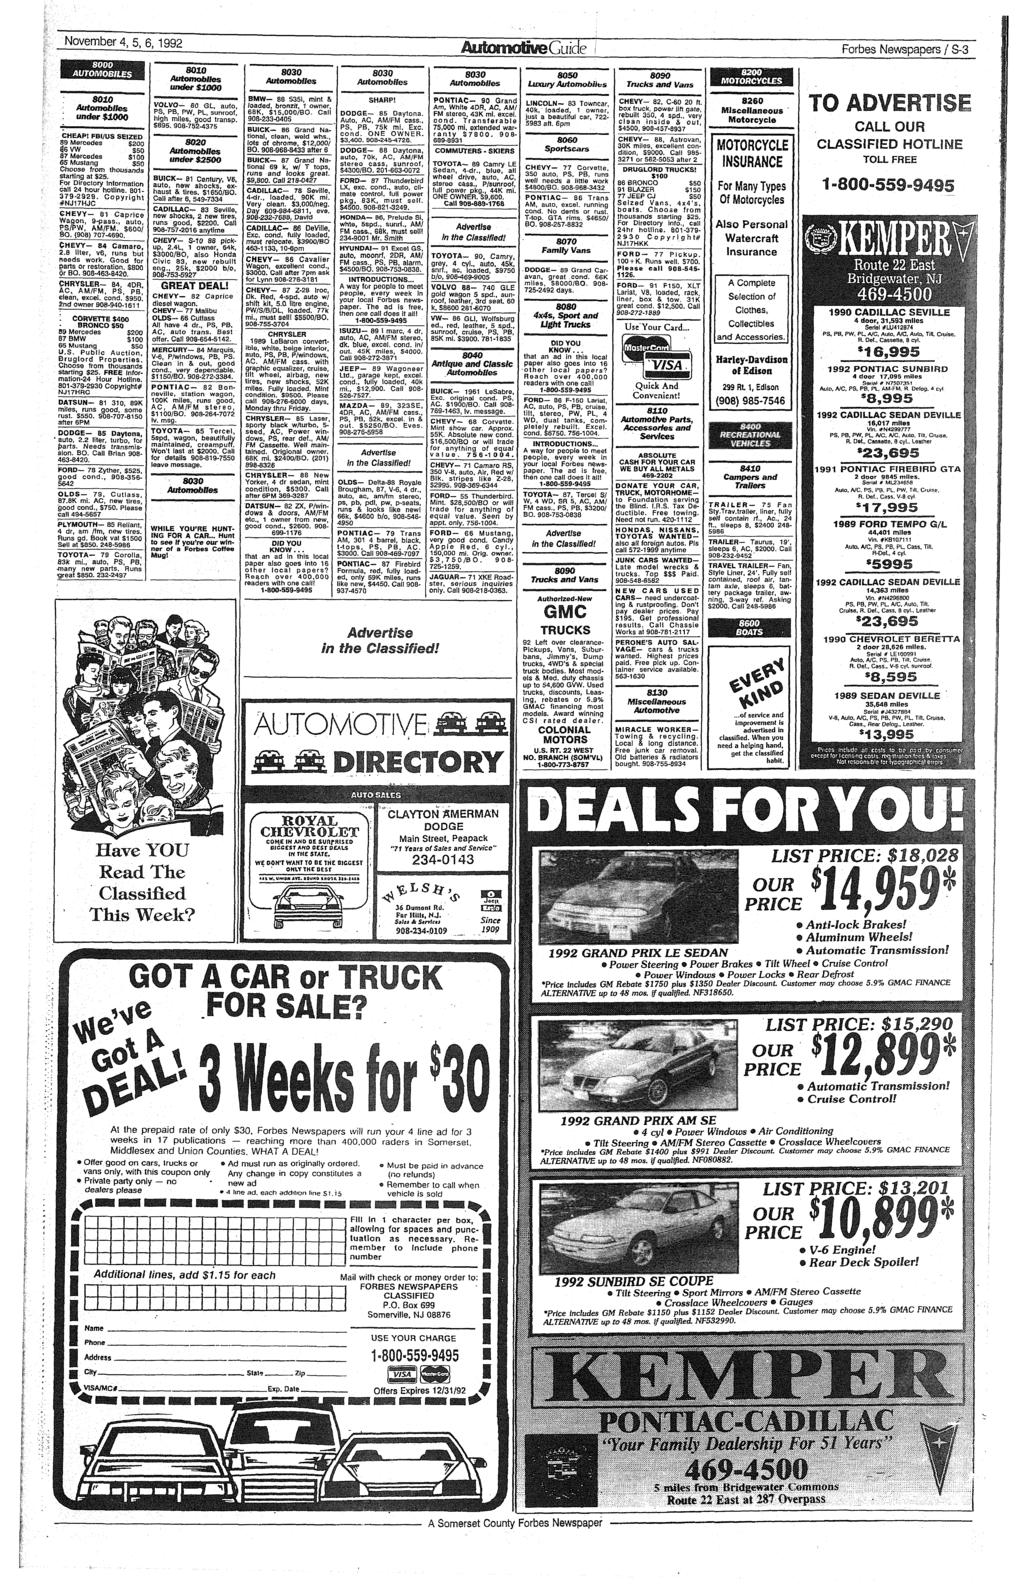 » November 4, 5, 6,1992 m AUTOMOBILES 8010 Automobiles under$1000 CHEAP! FBI/US SEIZED 89 Mercedes $200 $6VW S50 87 Mercedes $100 65 Mustang $50 Choose from thousands starting at S25.